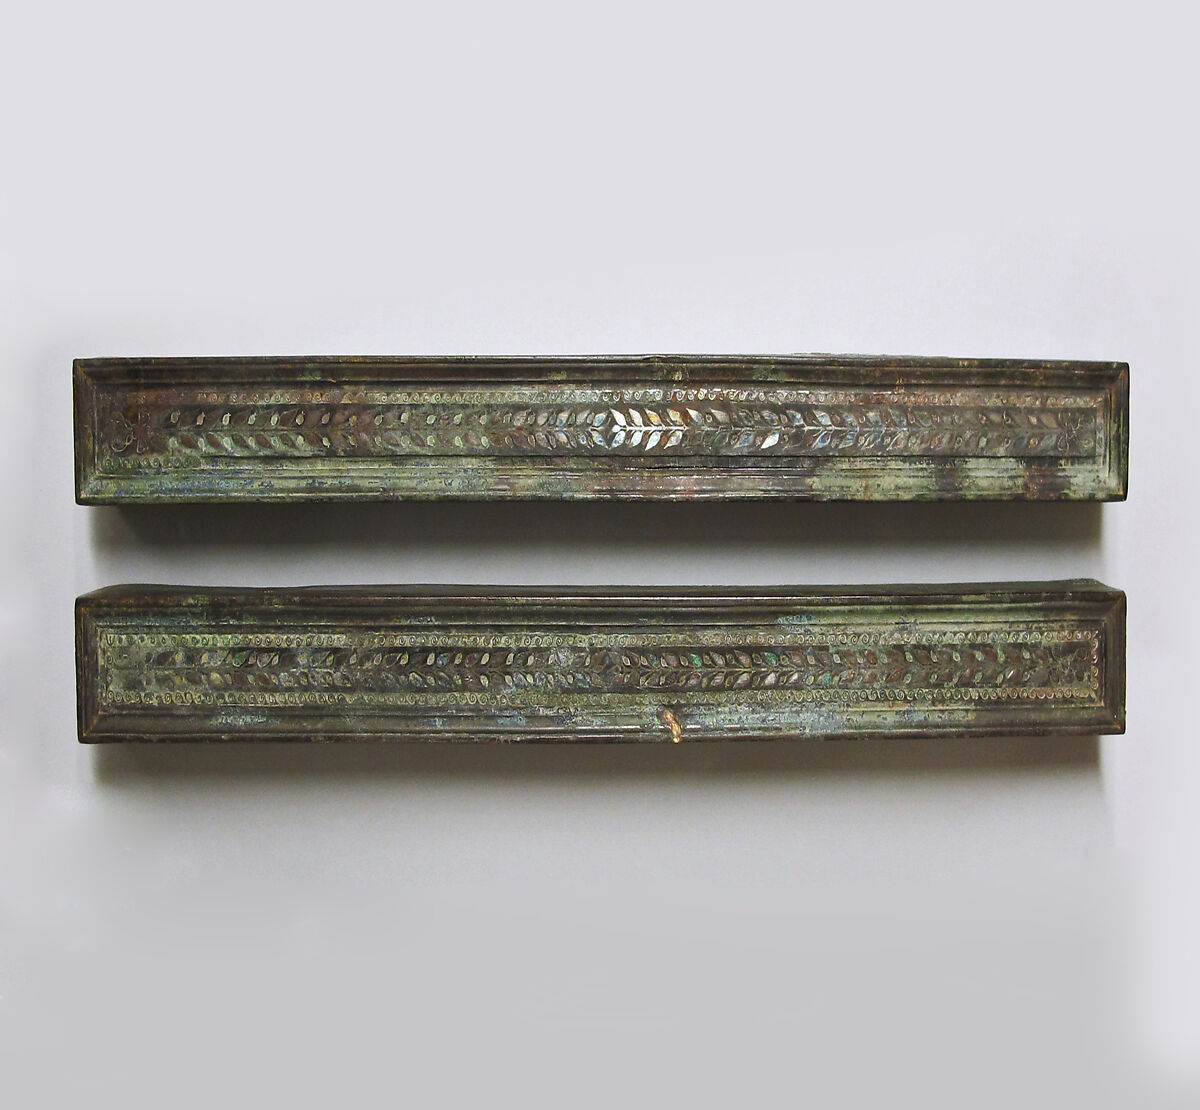 Bronze furniture attachments with silver inlay, Bronze, silver, Greek or Roman 